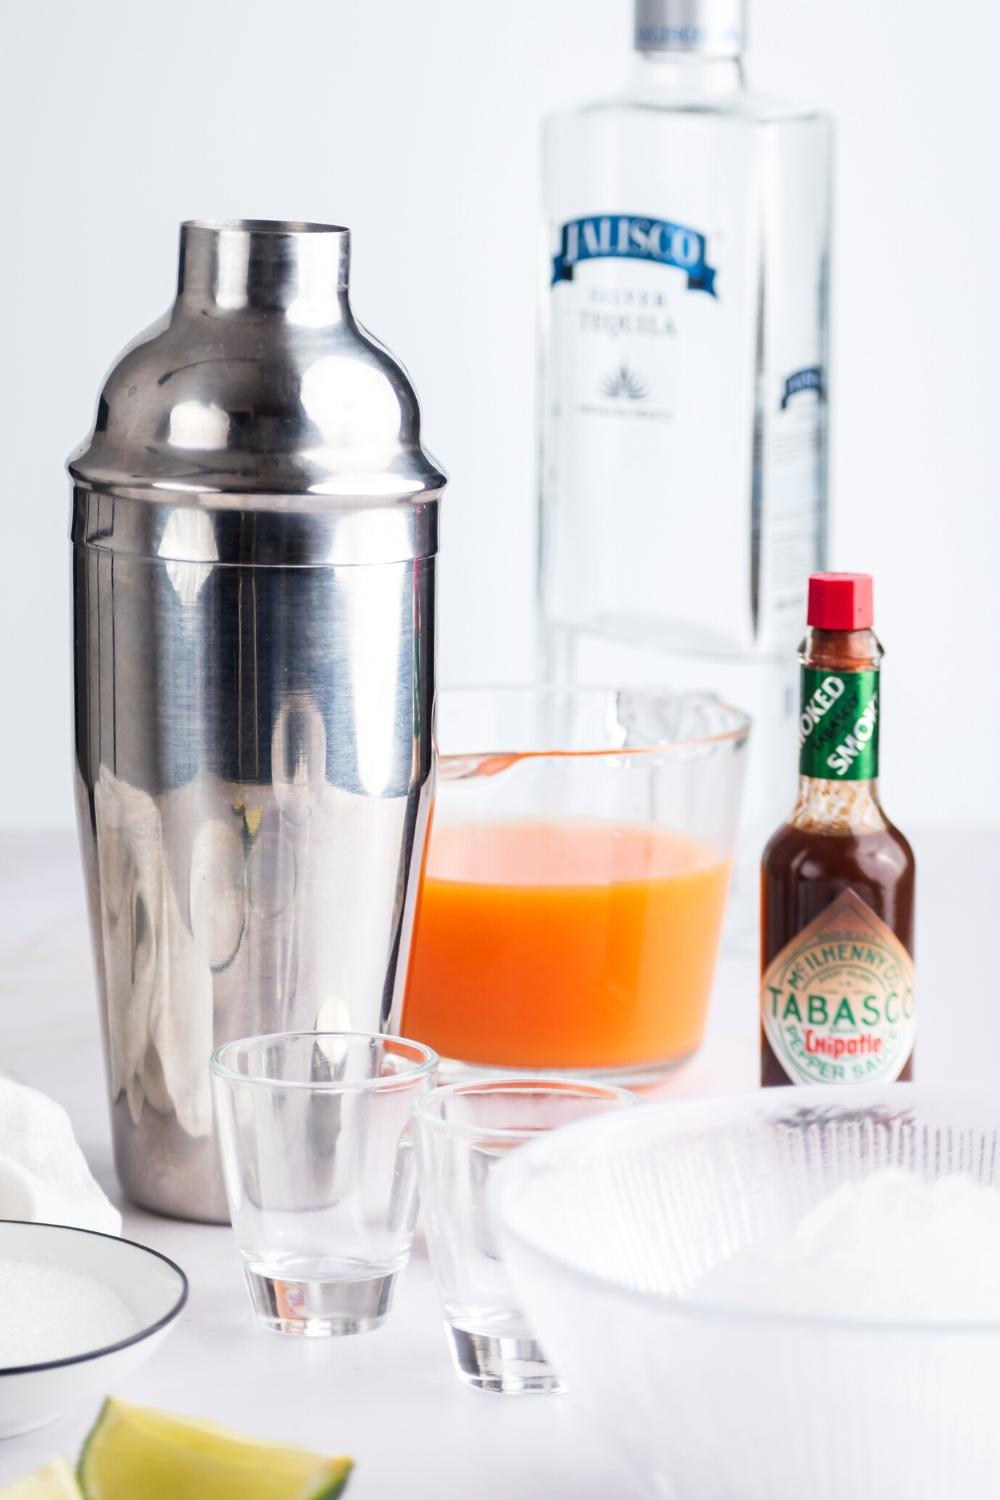 A cocktail mixer, two shot glasses, a bottle of tobasco, a jug of fruit juice, and a bottle of vodka.